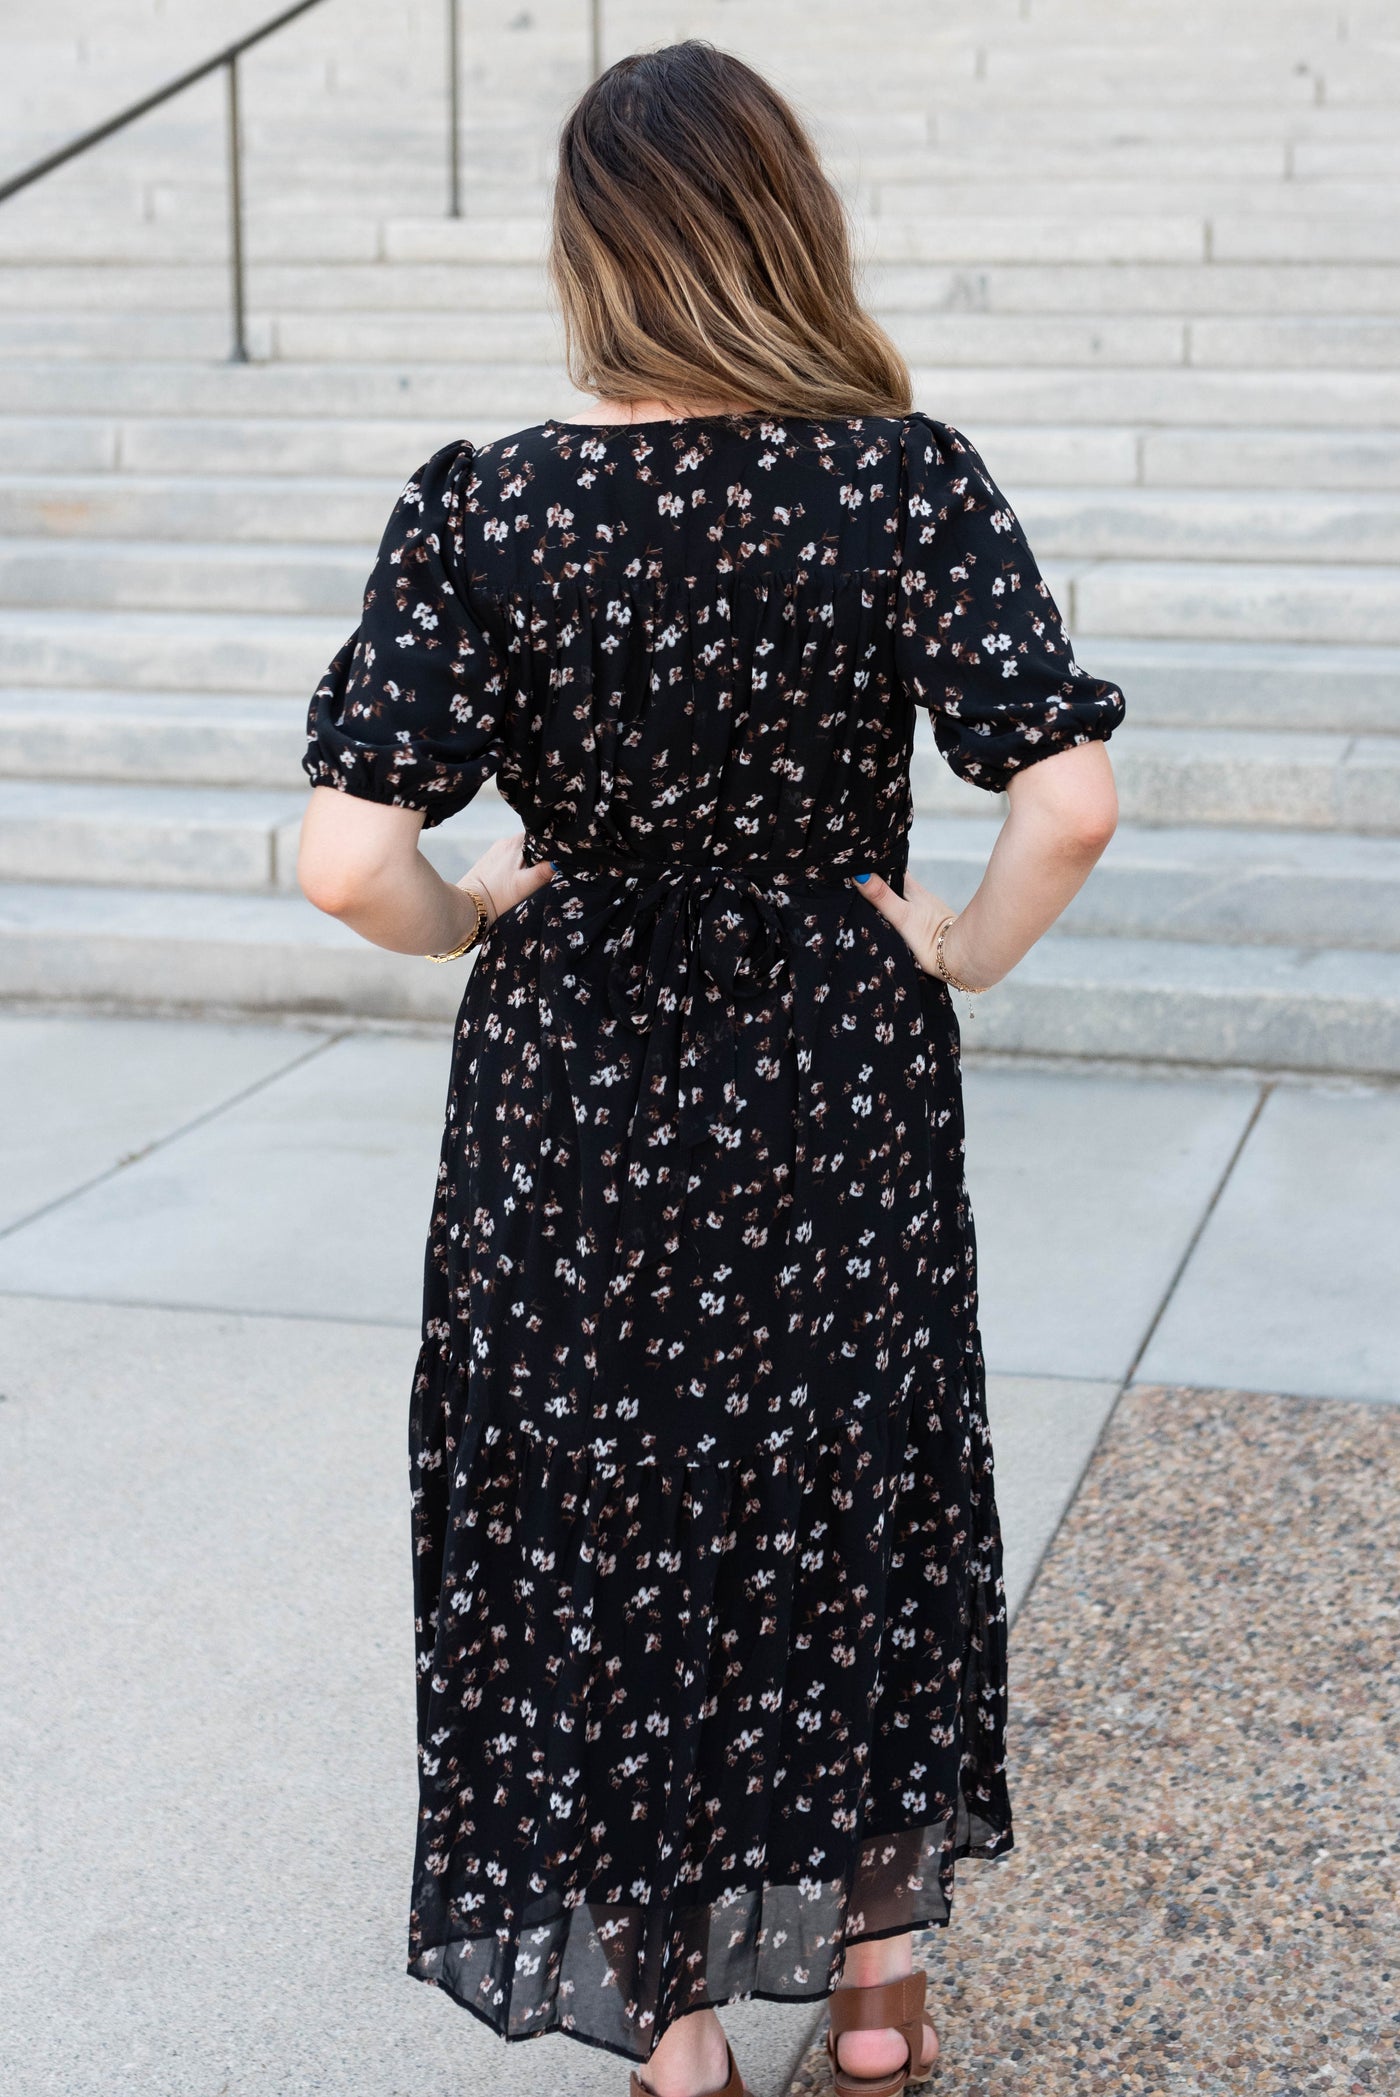 Back view of the black floral smocked dress